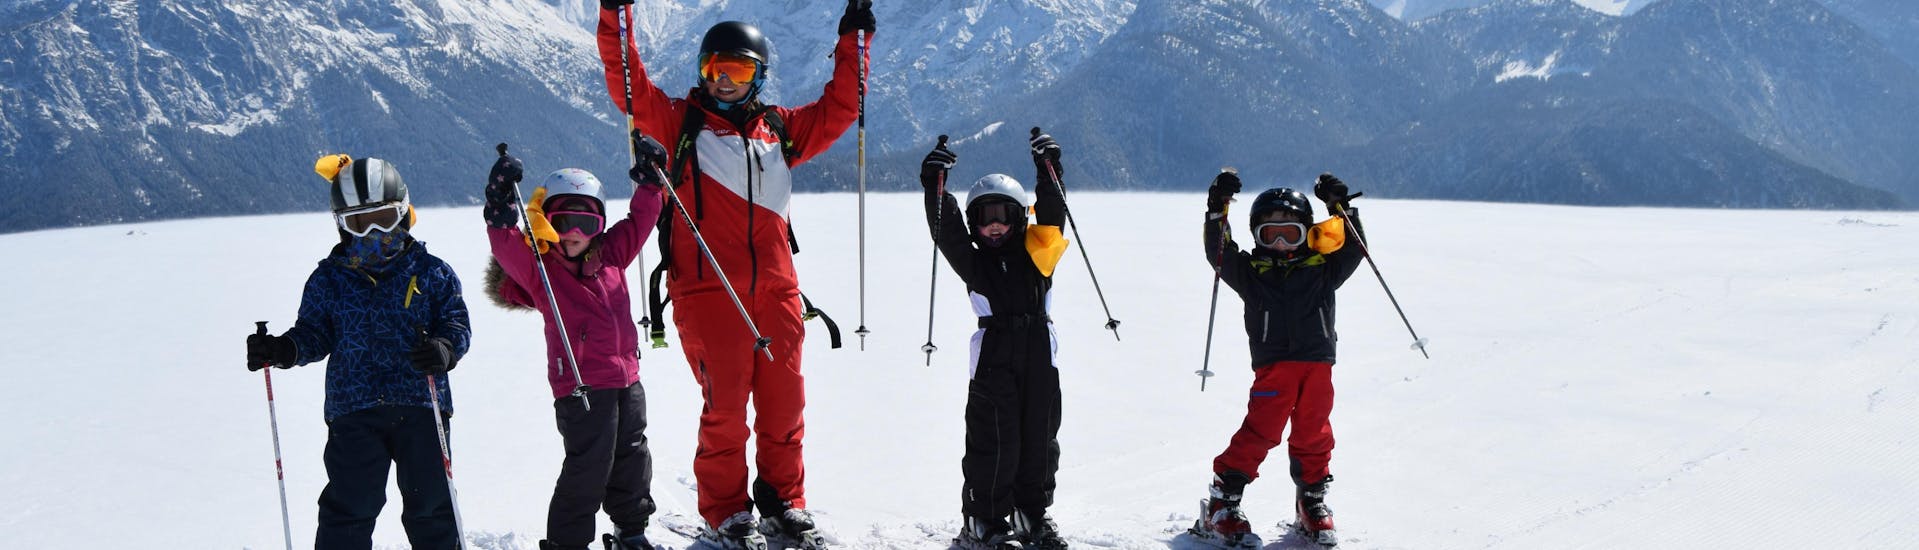 Teen Ski Lessons (11-15 y.) for Advanced Skiers with HERBST Ski School Lofer - Hero image